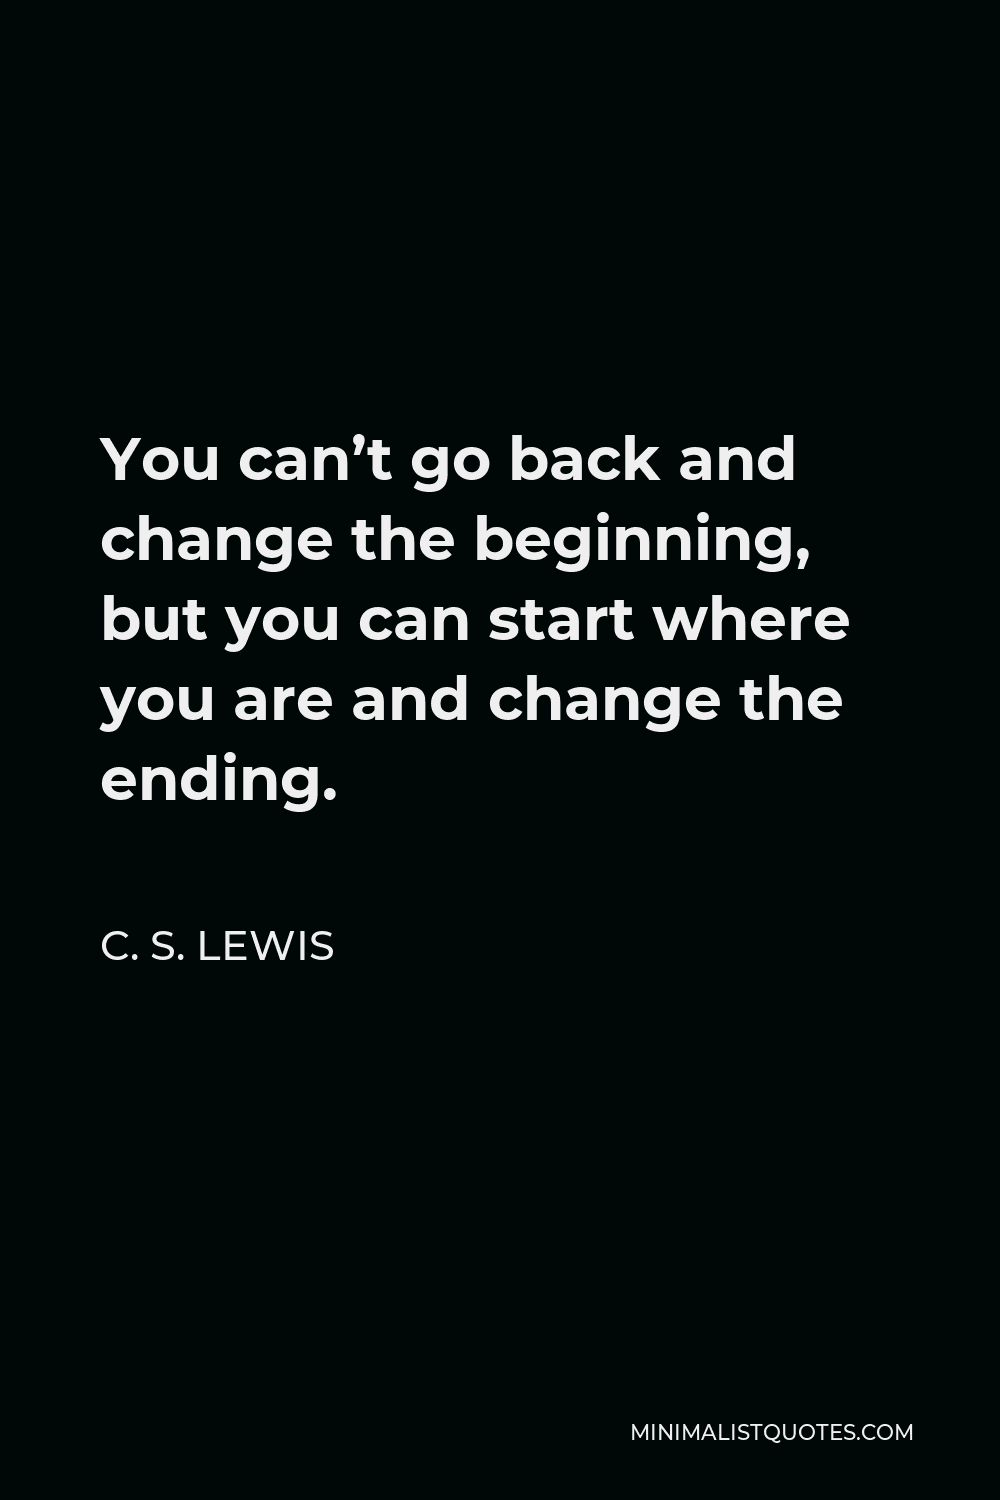 C. S. Lewis Quote - You can’t go back and change the beginning, but you can start where you are and change the ending.